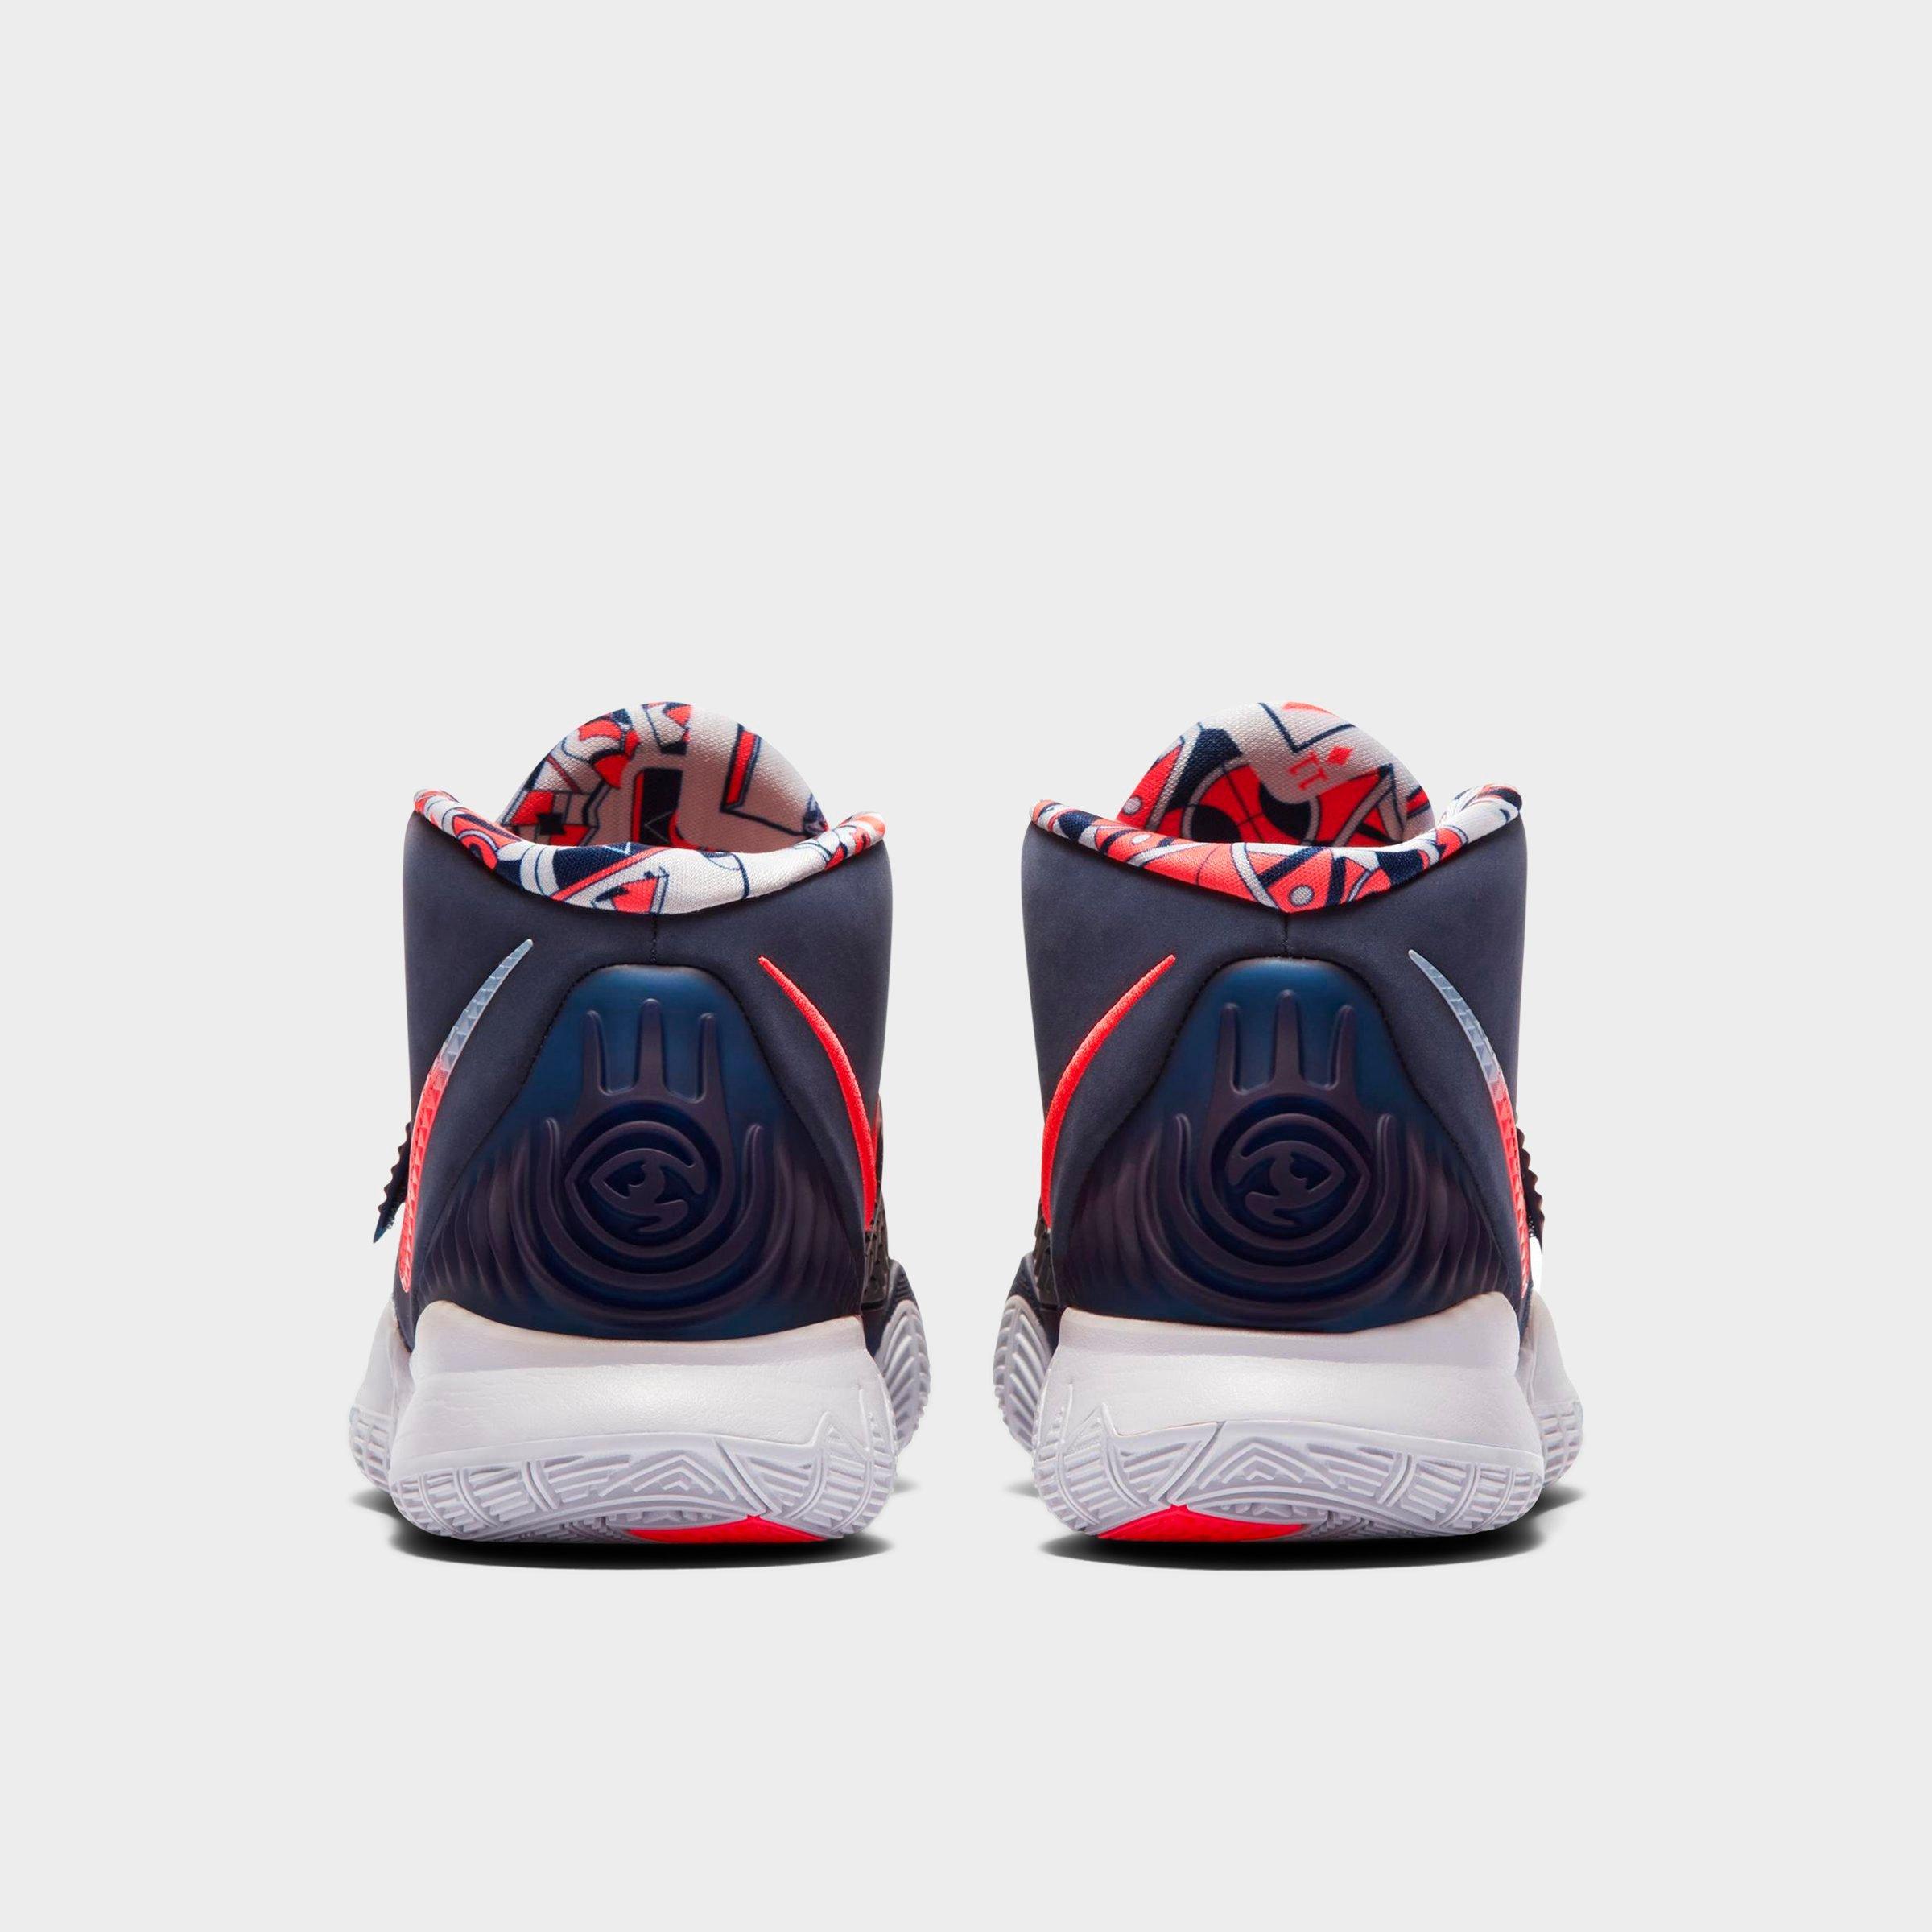 kyrie shoes finish line